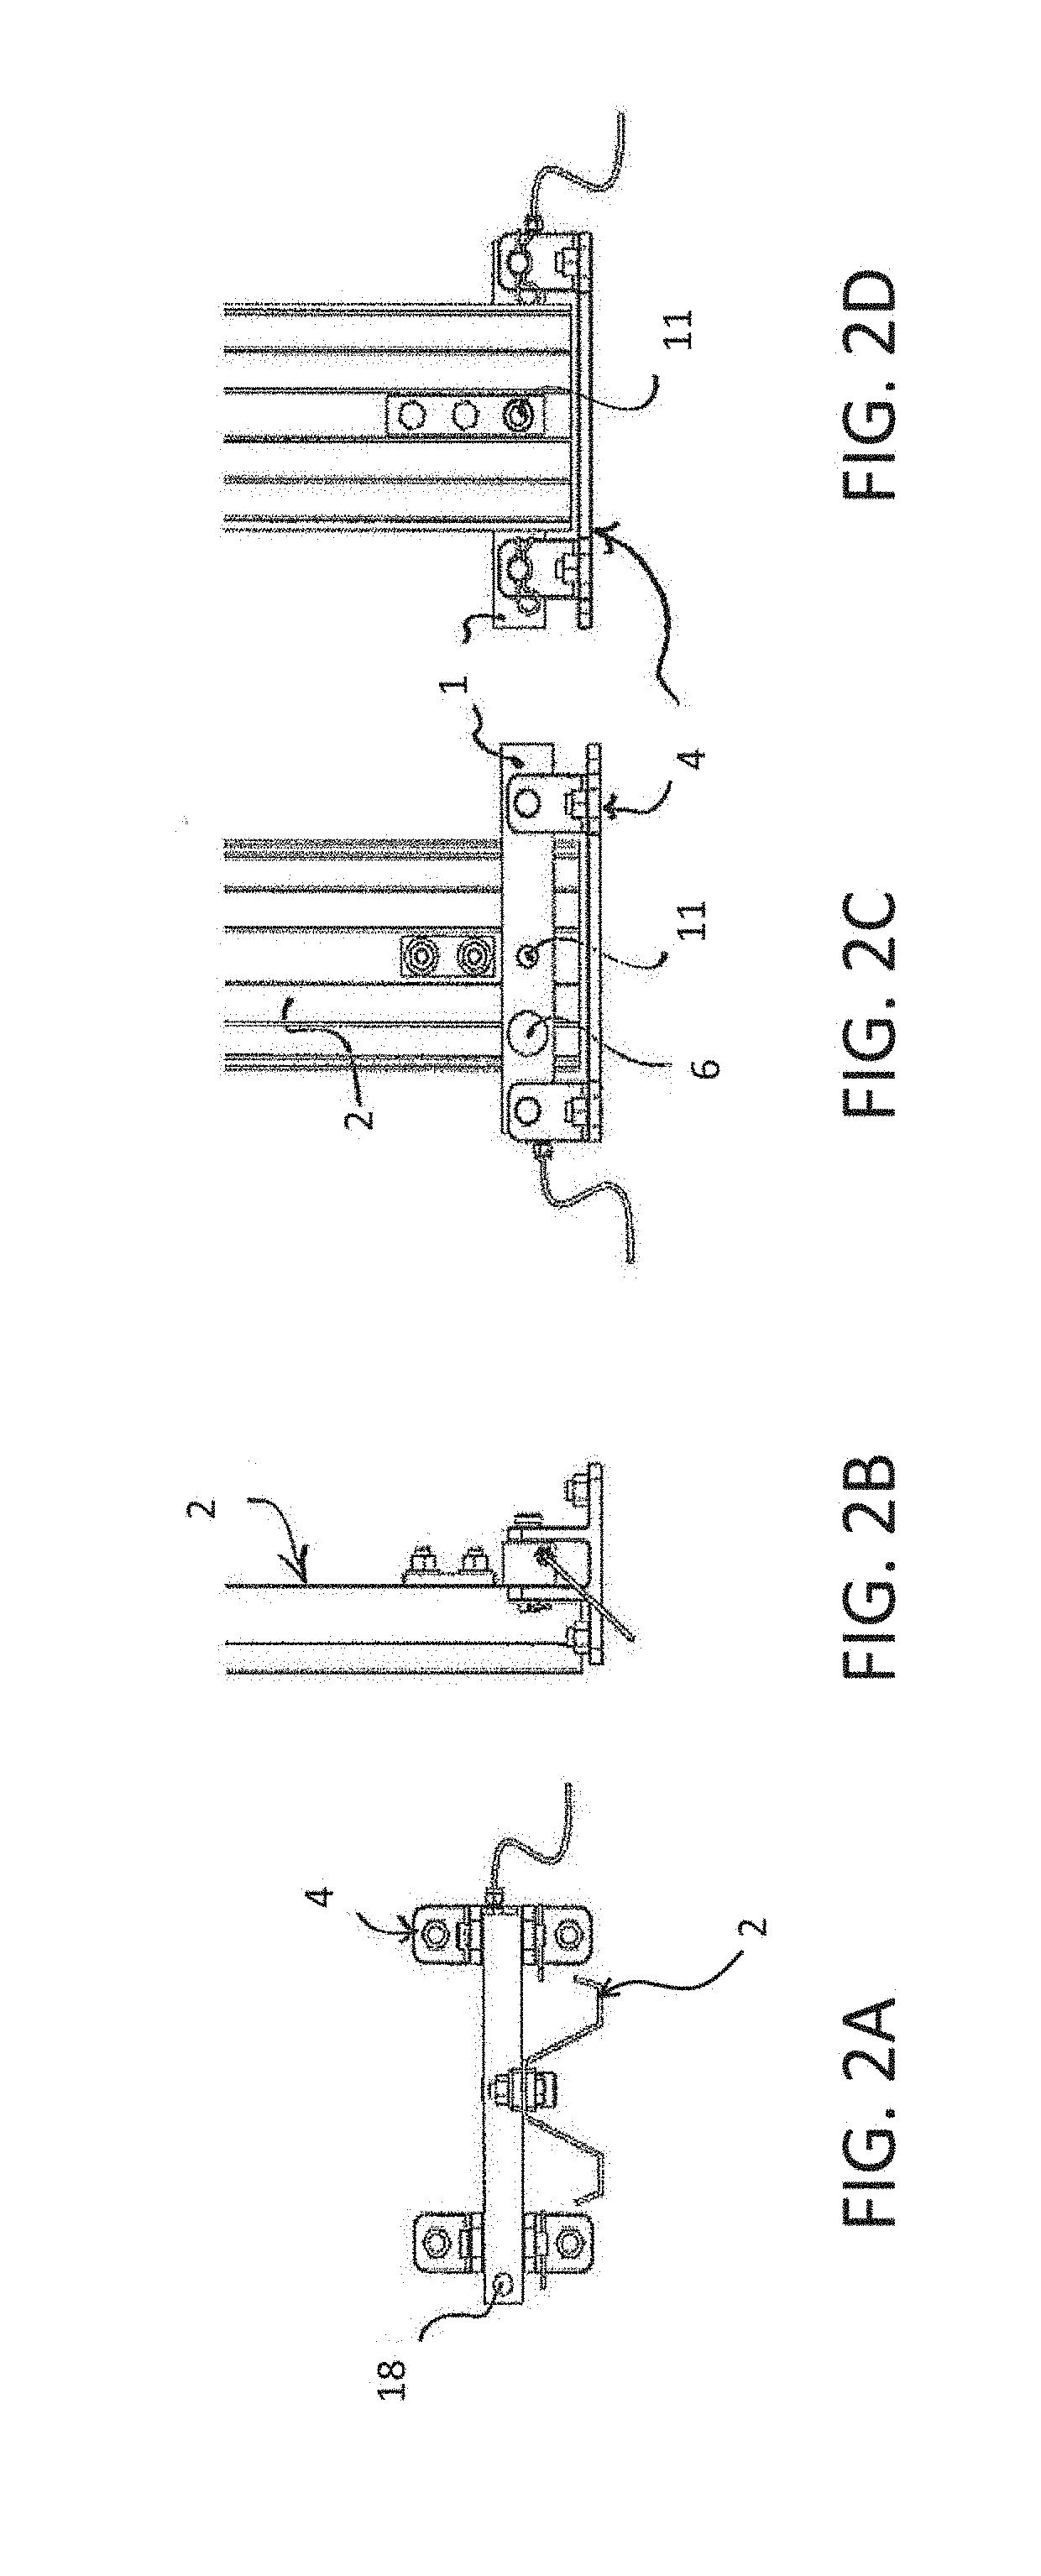 Method and apparatus to monitor a reservoir or a structure